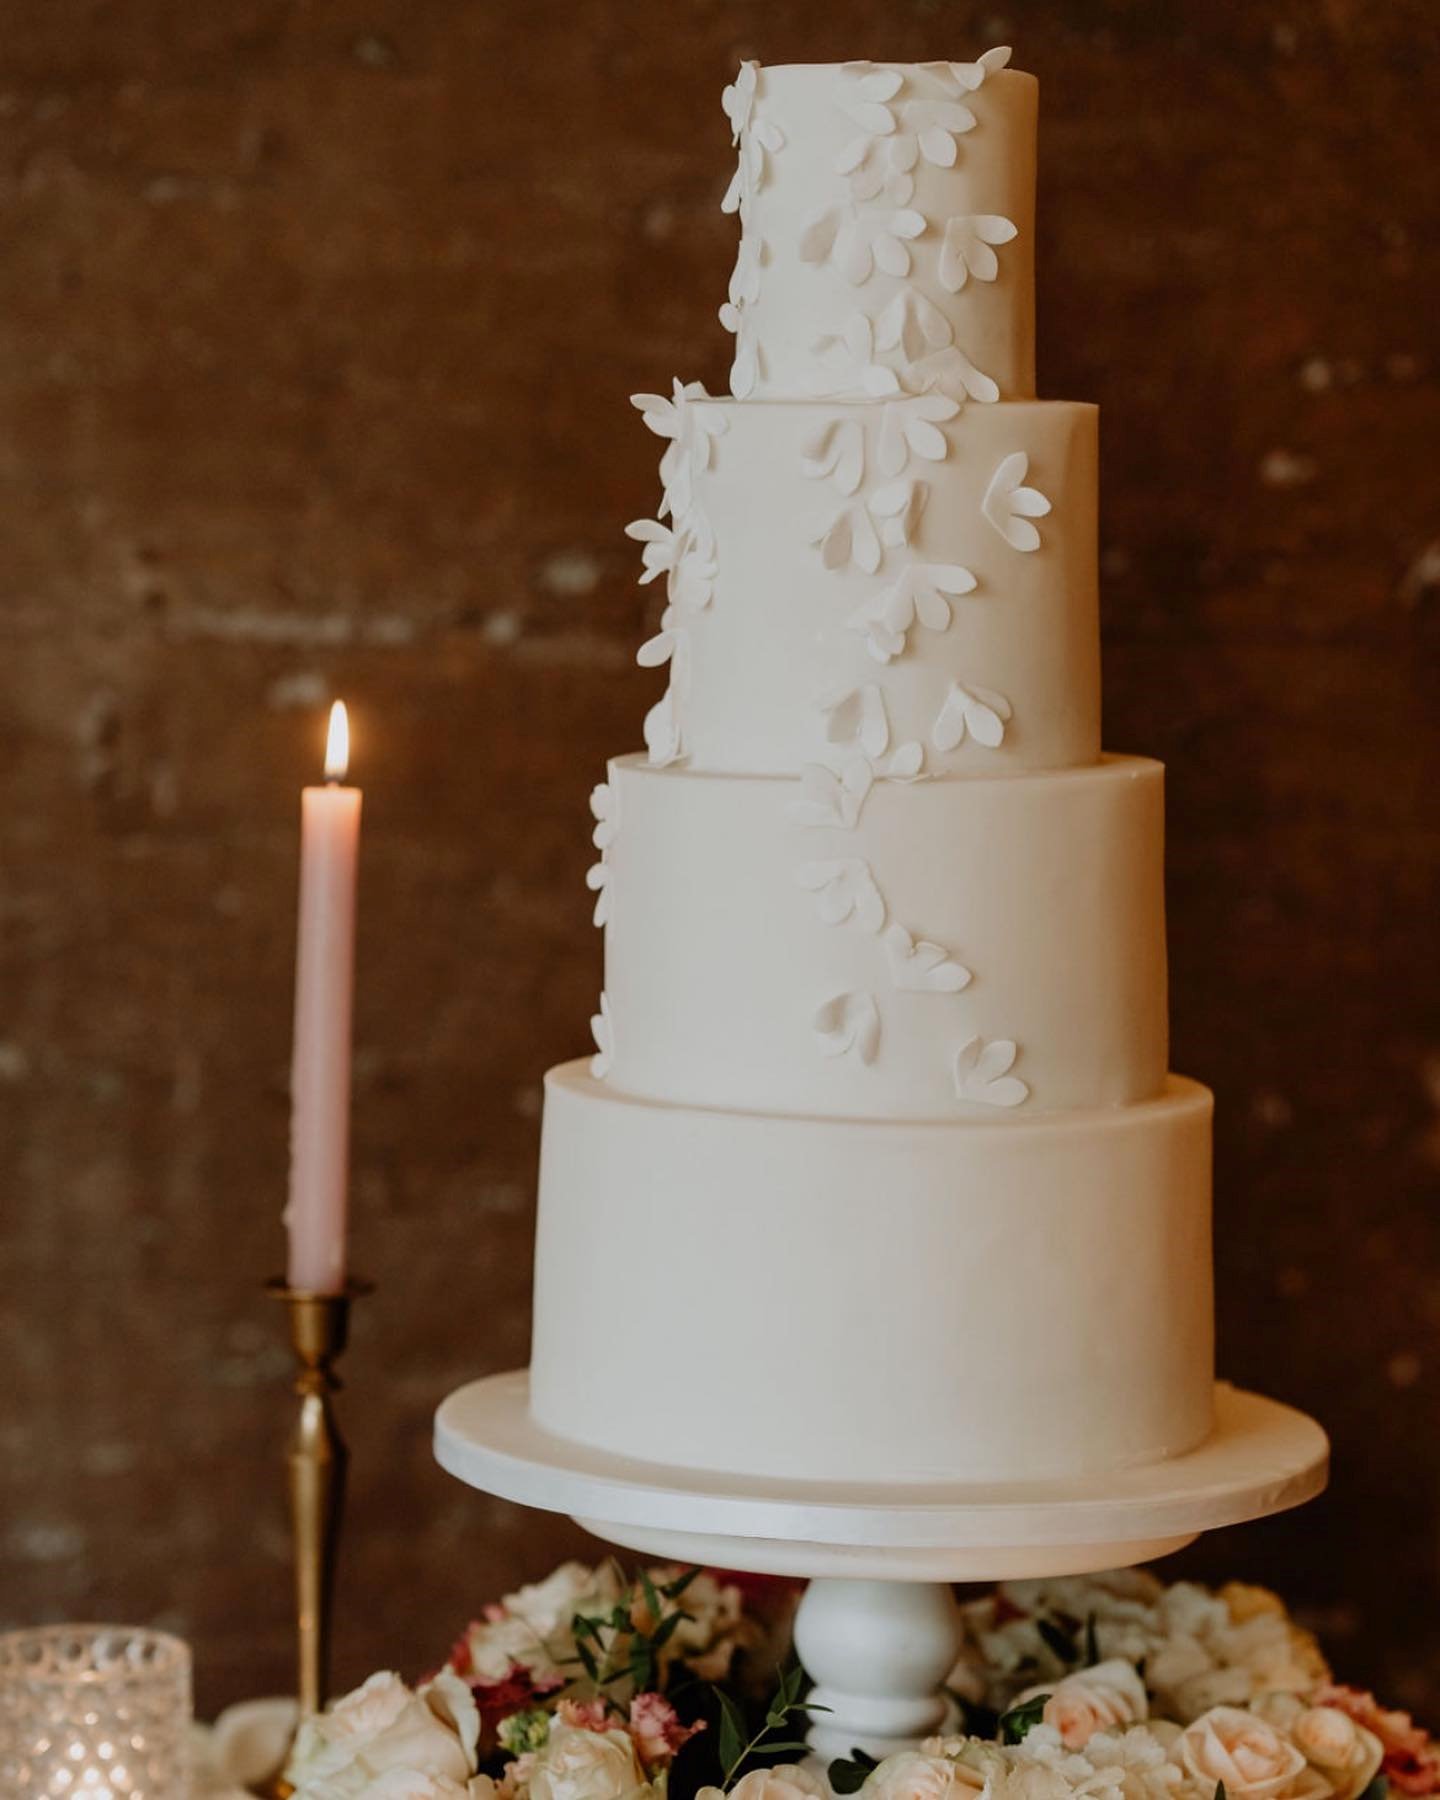 White wedding cake with elegant white florals in icing for a luxury wedding in the cotswolds